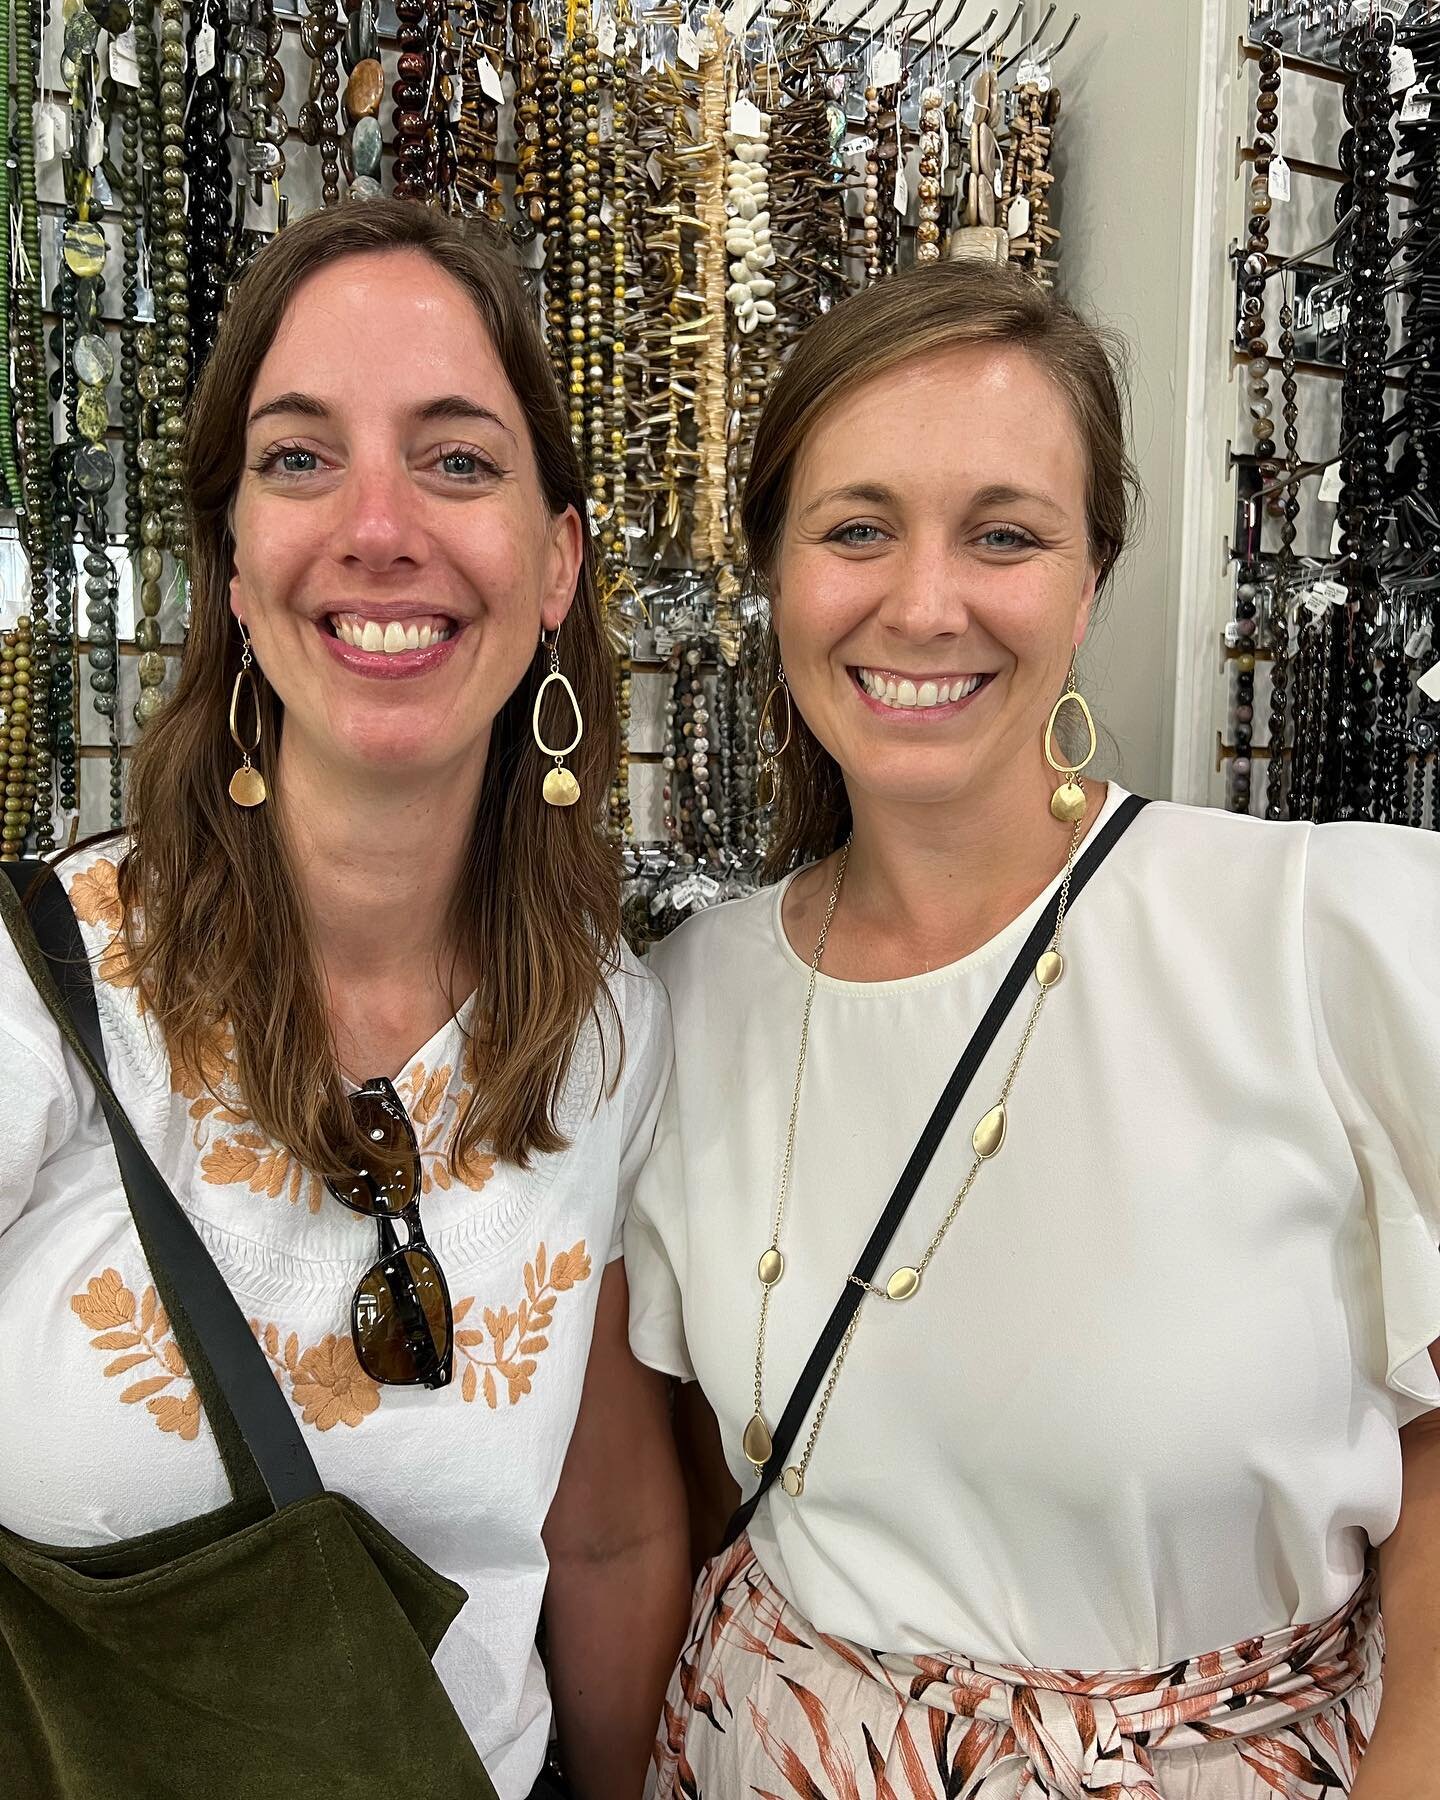 Friends make matching earrings at CrystalBeadBazaar! Bring a friend and make a quick pair or earrings or bracelet to go!  #diyjewelrymaking #lawrenceville #earrings